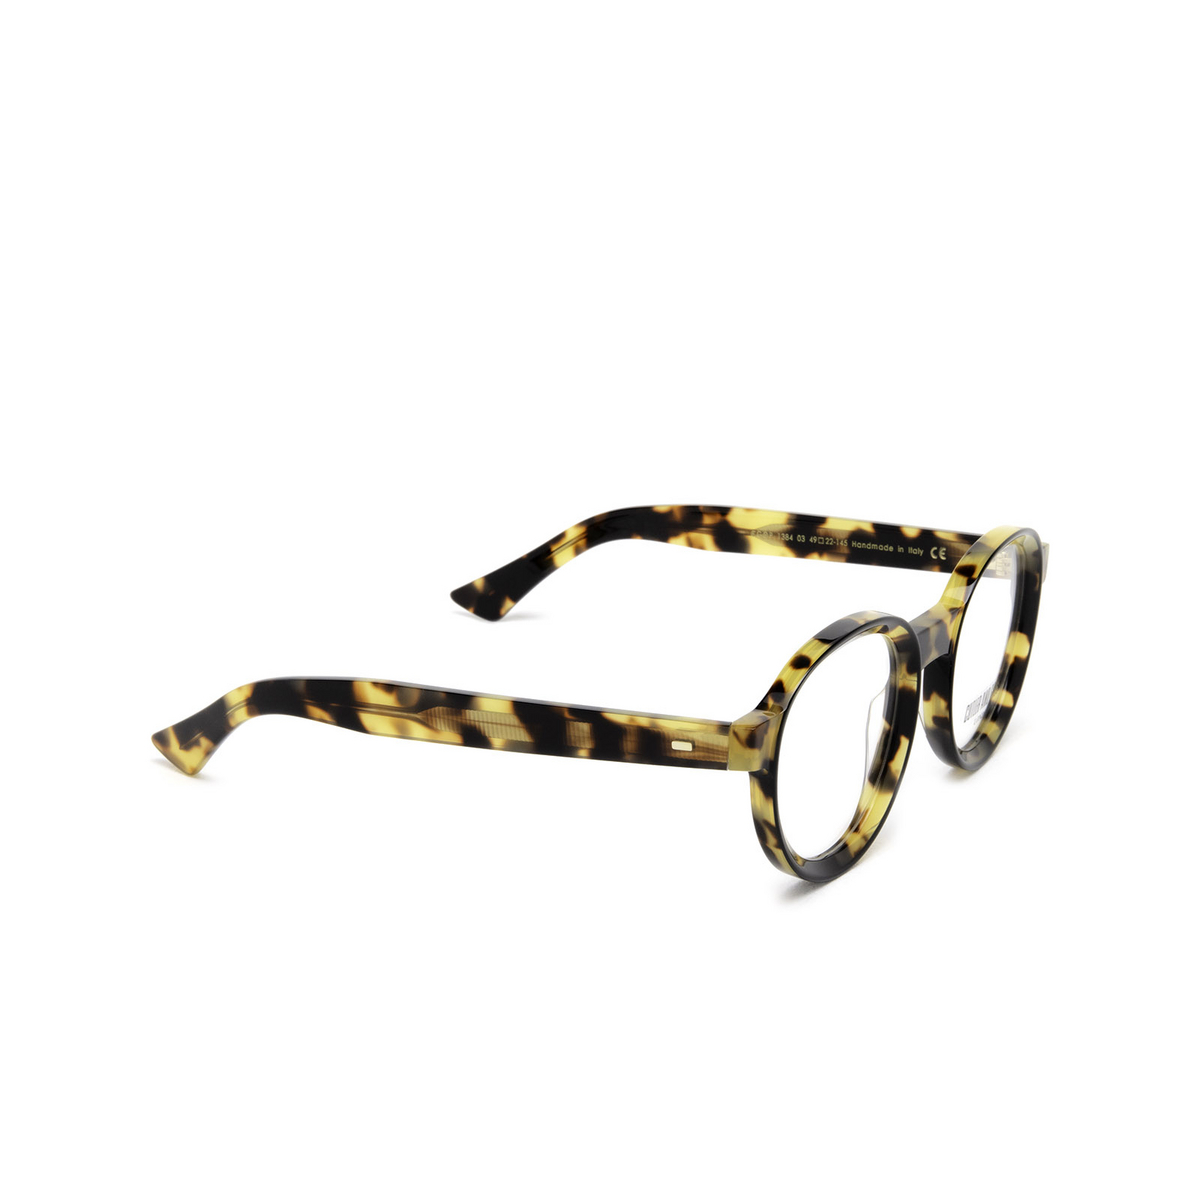 Cutler and Gross 1384 Eyeglasses 03 Black on Camo - three-quarters view